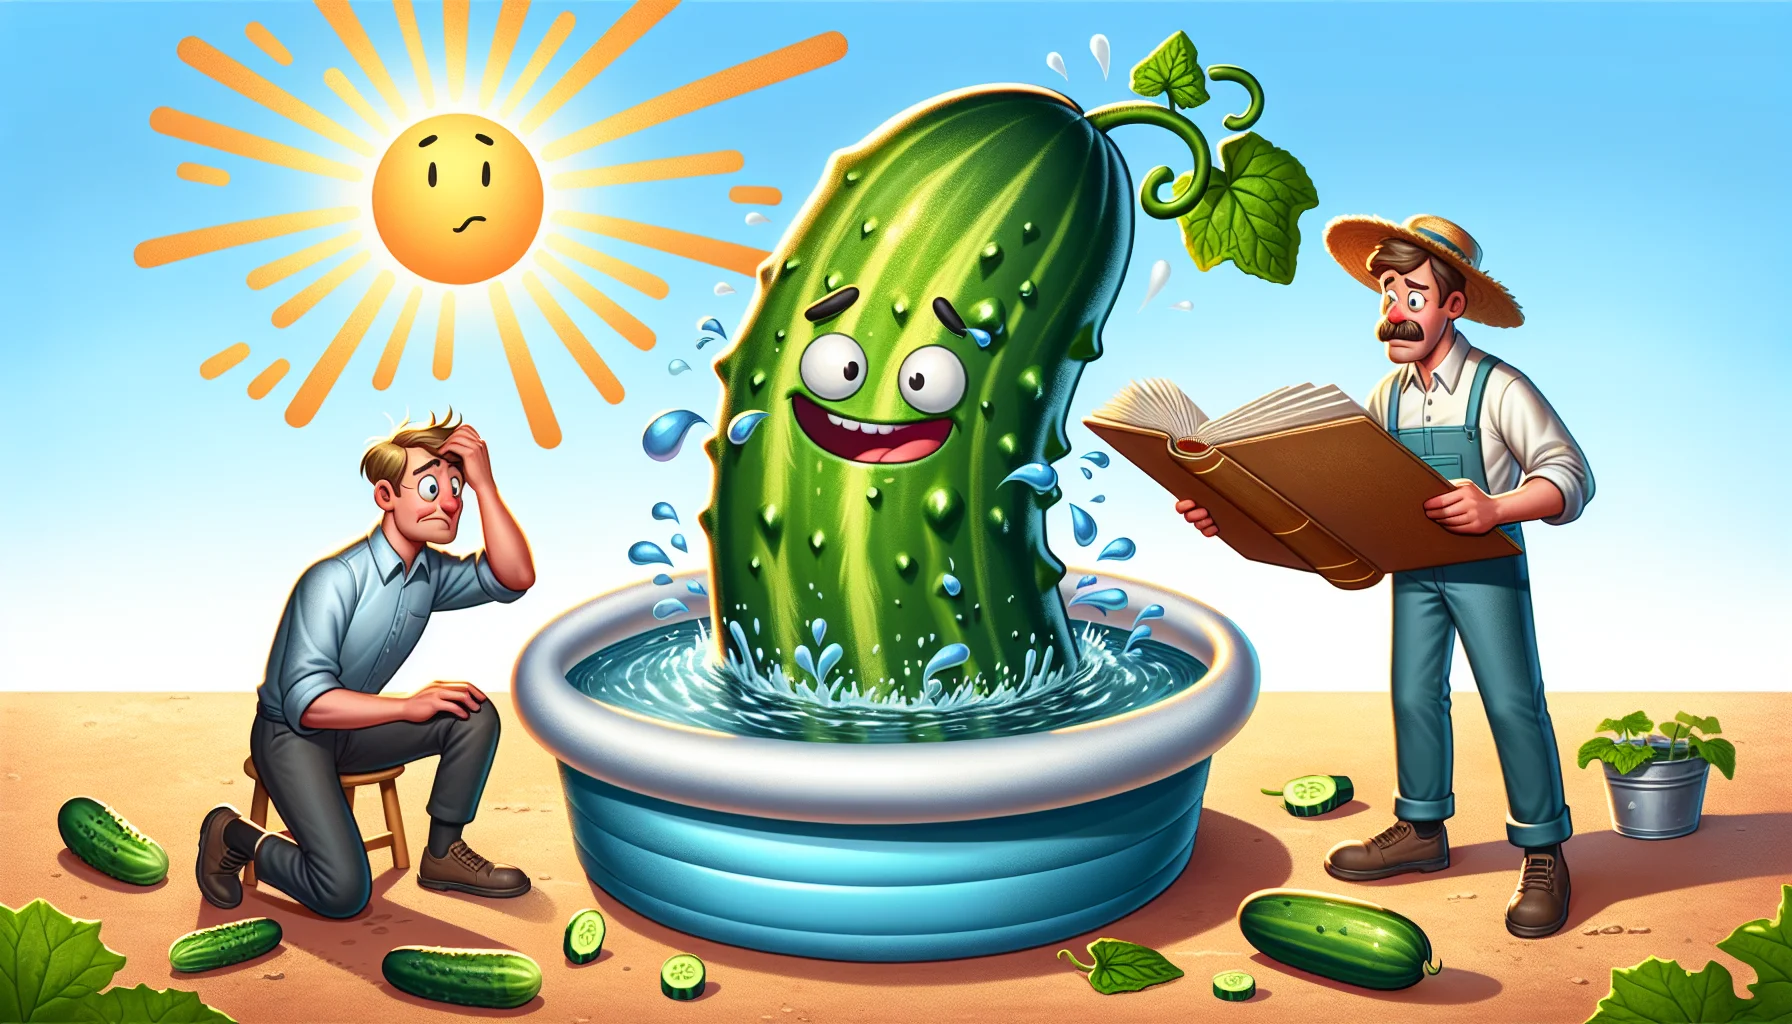 Create an image where a large cucumber wearing a playful grin lies in a baby pool filled to the brim with water. Sun rays are beaming down on it. Nearby, a gardener, a Caucasian man with blond hair and a hat, reads a giant book titled 'How much water does a cucumber need?'. He scratches his head in confusion looking at the cucumber who playfully splashes water with its vine. This lighthearted scene invites people to find joy in gardening.